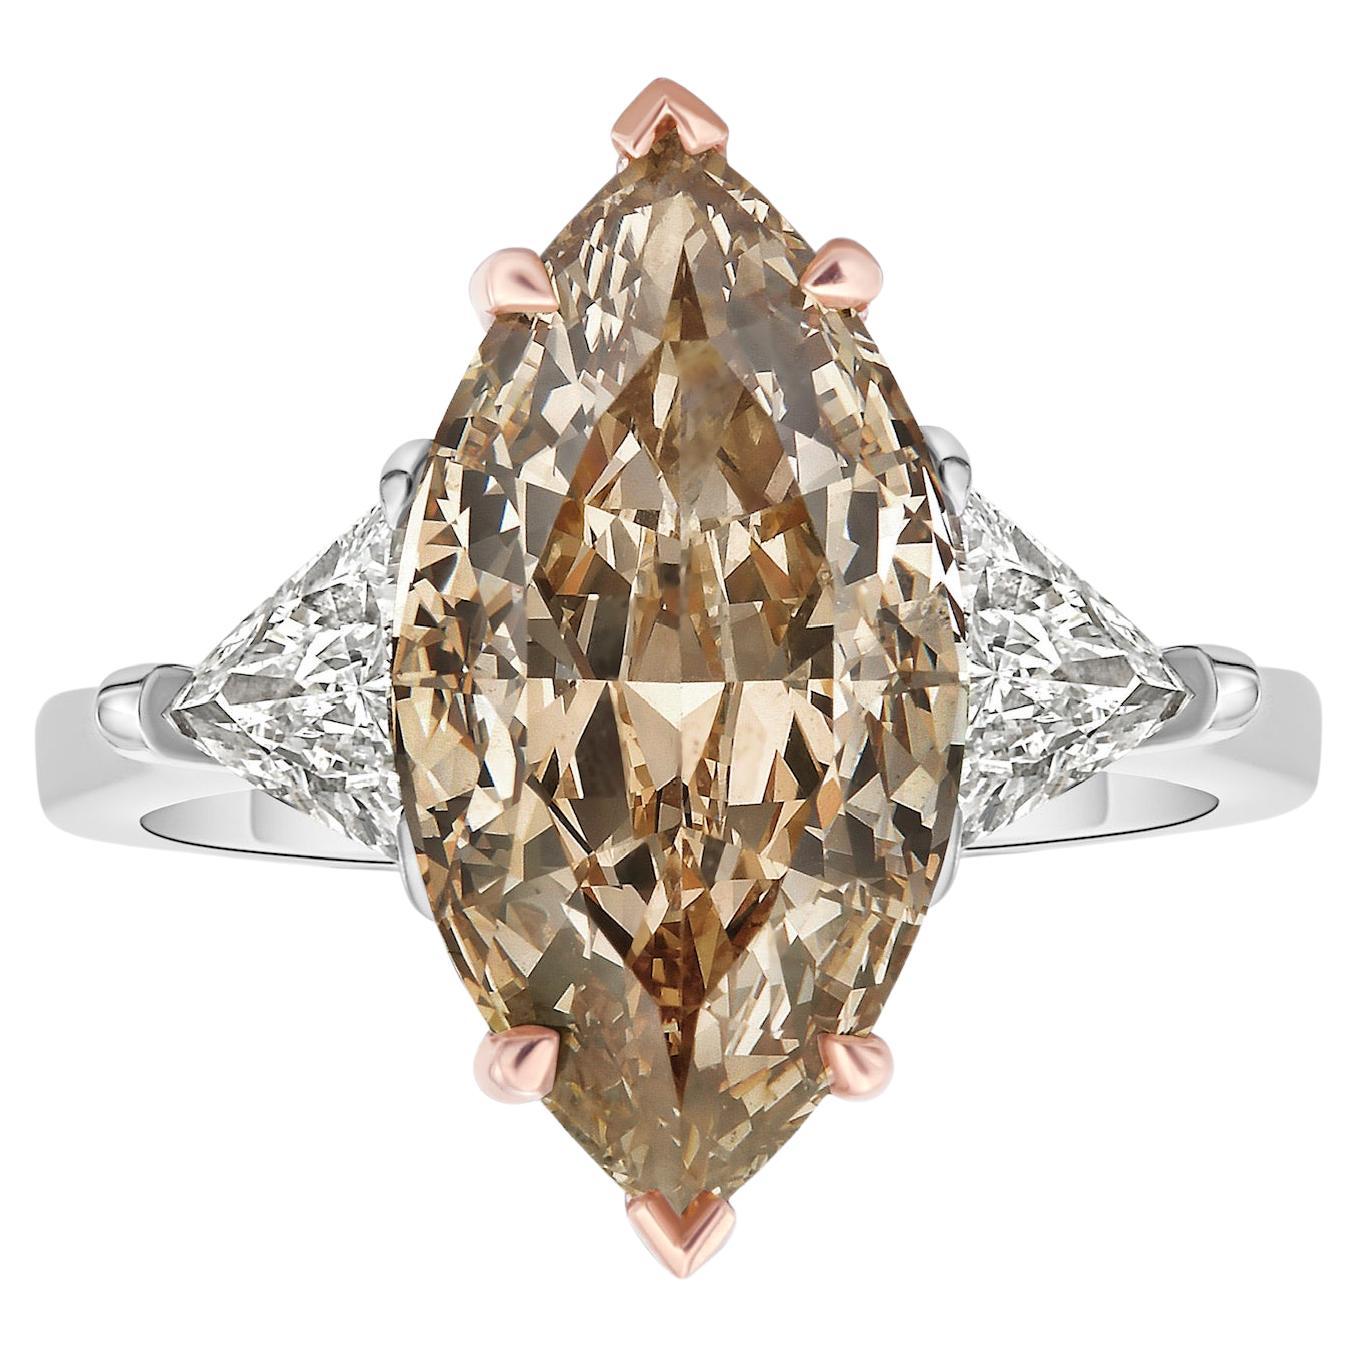 5 Carat Marquise Cut Fancy Yellow Brown Diamond Ring For Sale